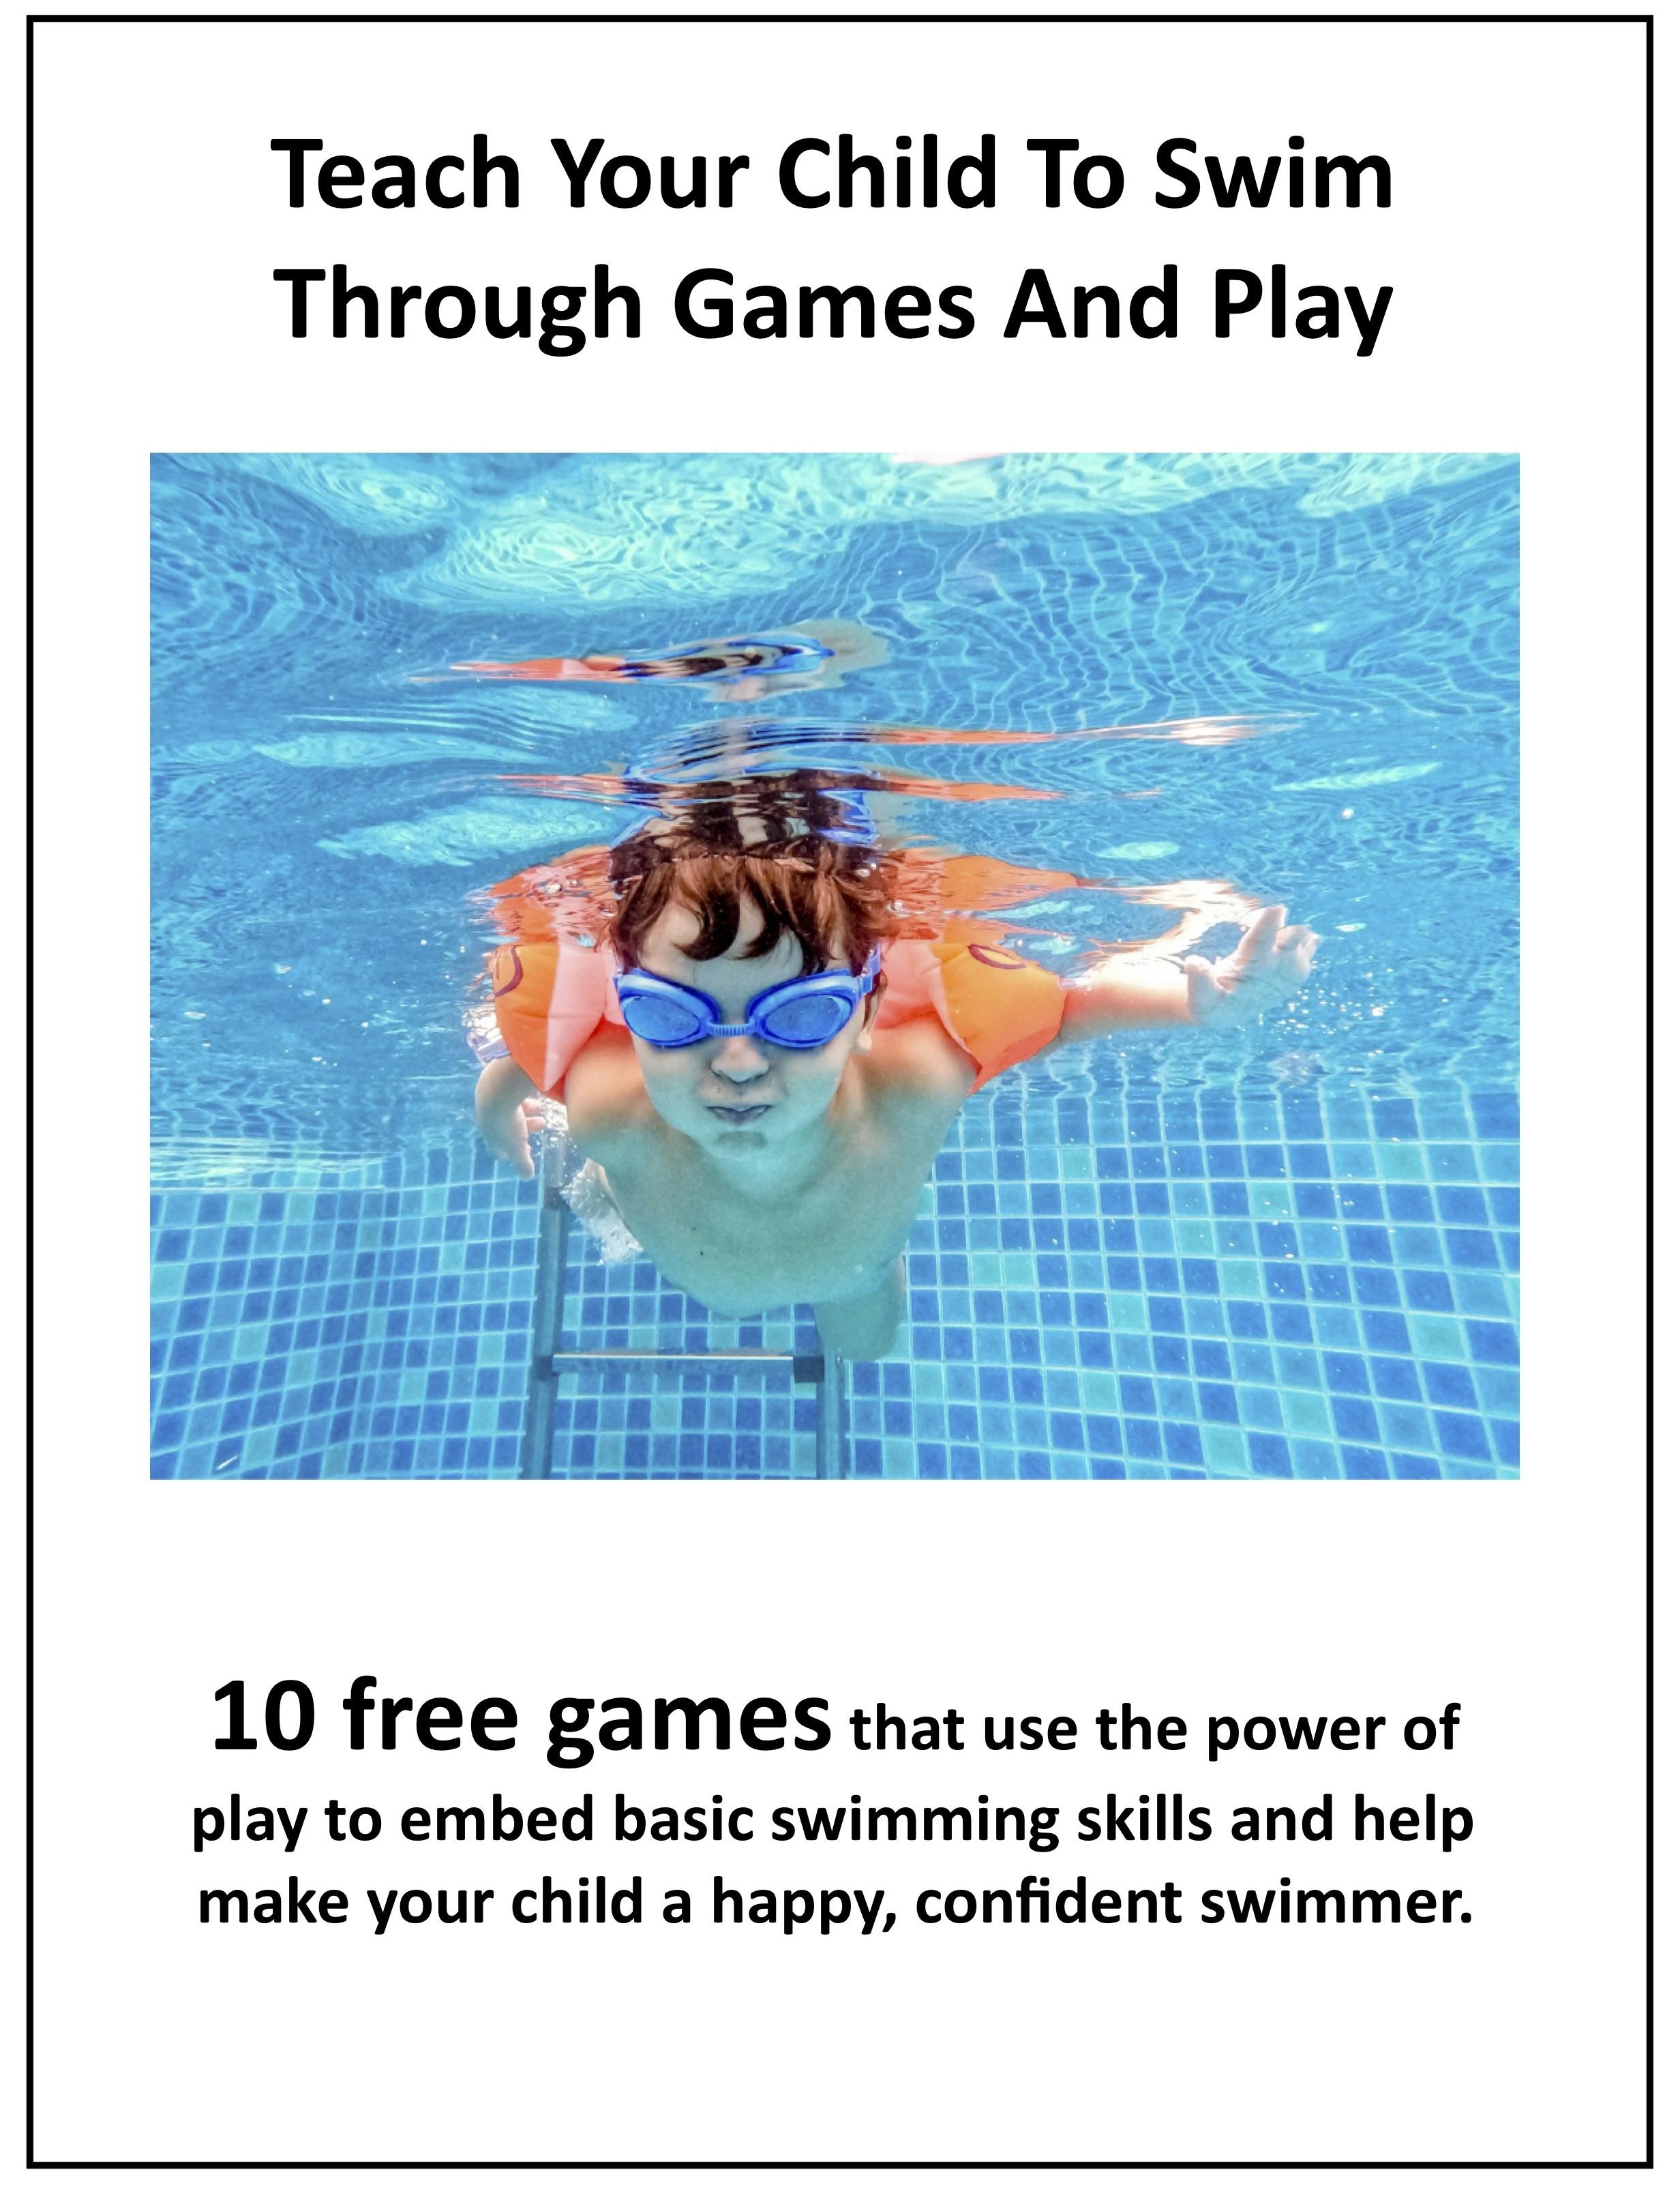 Aqua-Tots Swim Schools Olathe - Simon Says Play a game! Simon Says is  one of the teaching tools our Coaches use to work with your kiddos,  especially in Level 3 while they're